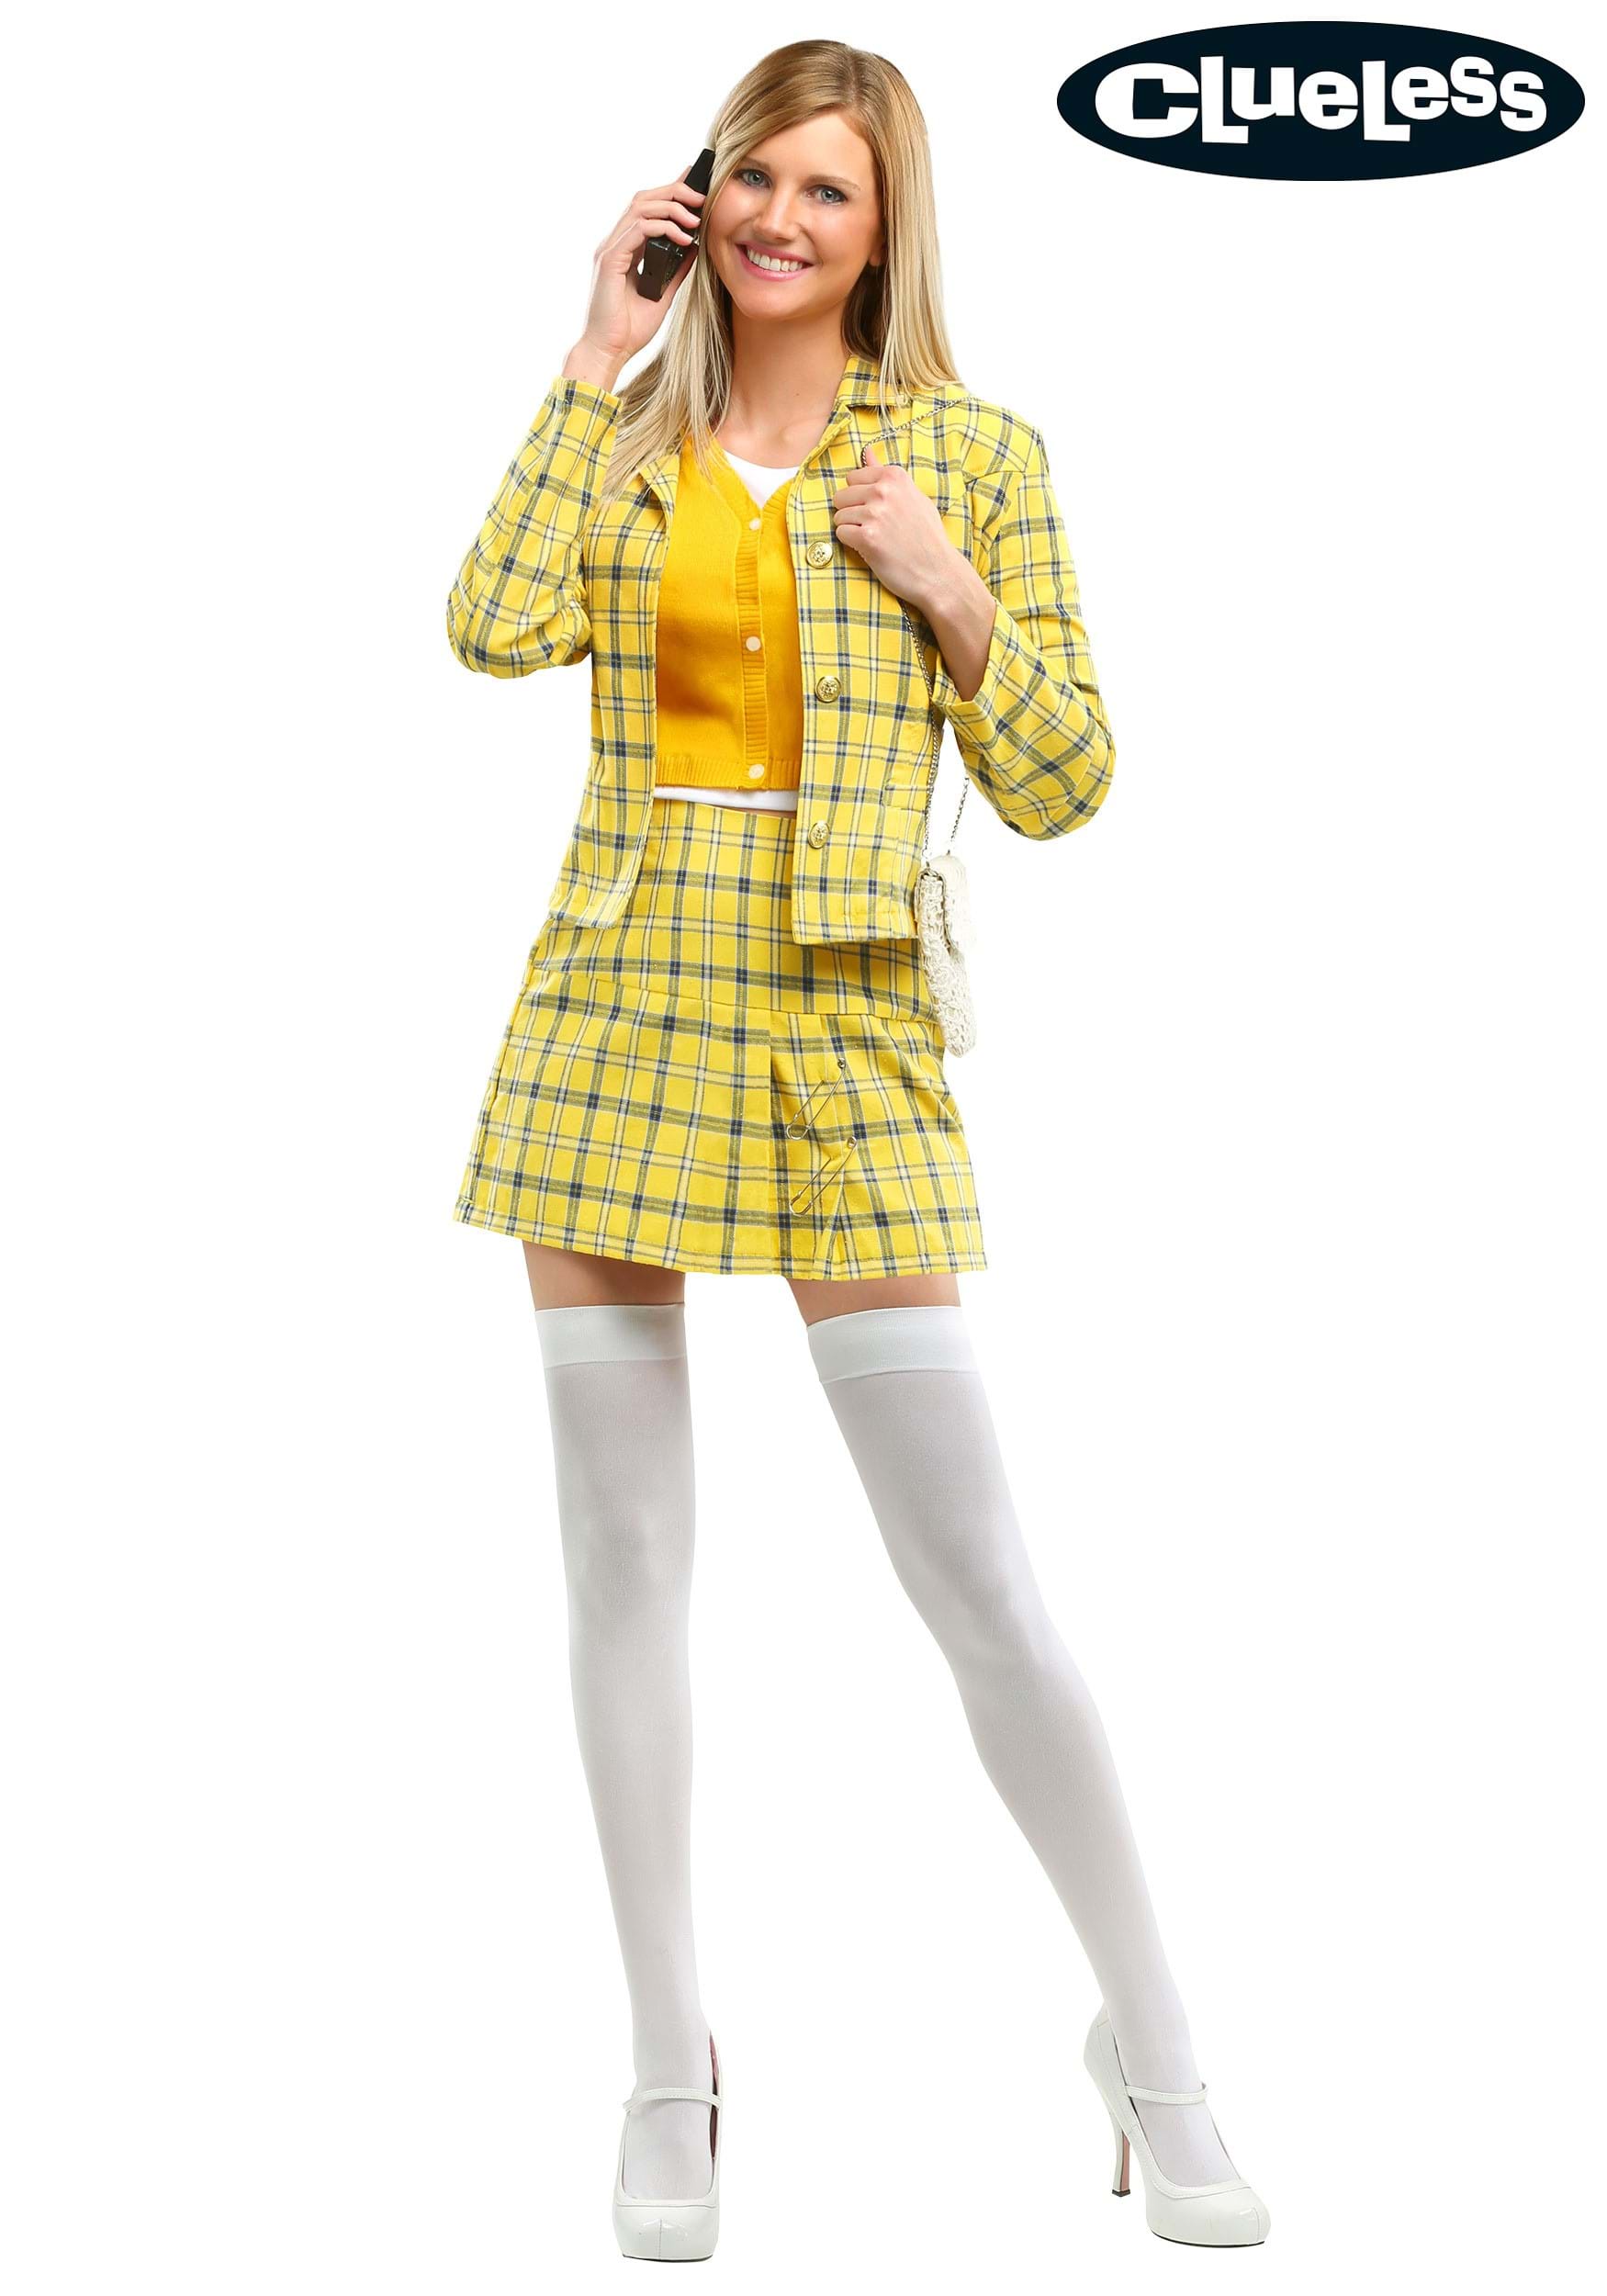 Clueless Cher Plus Size Costume for 